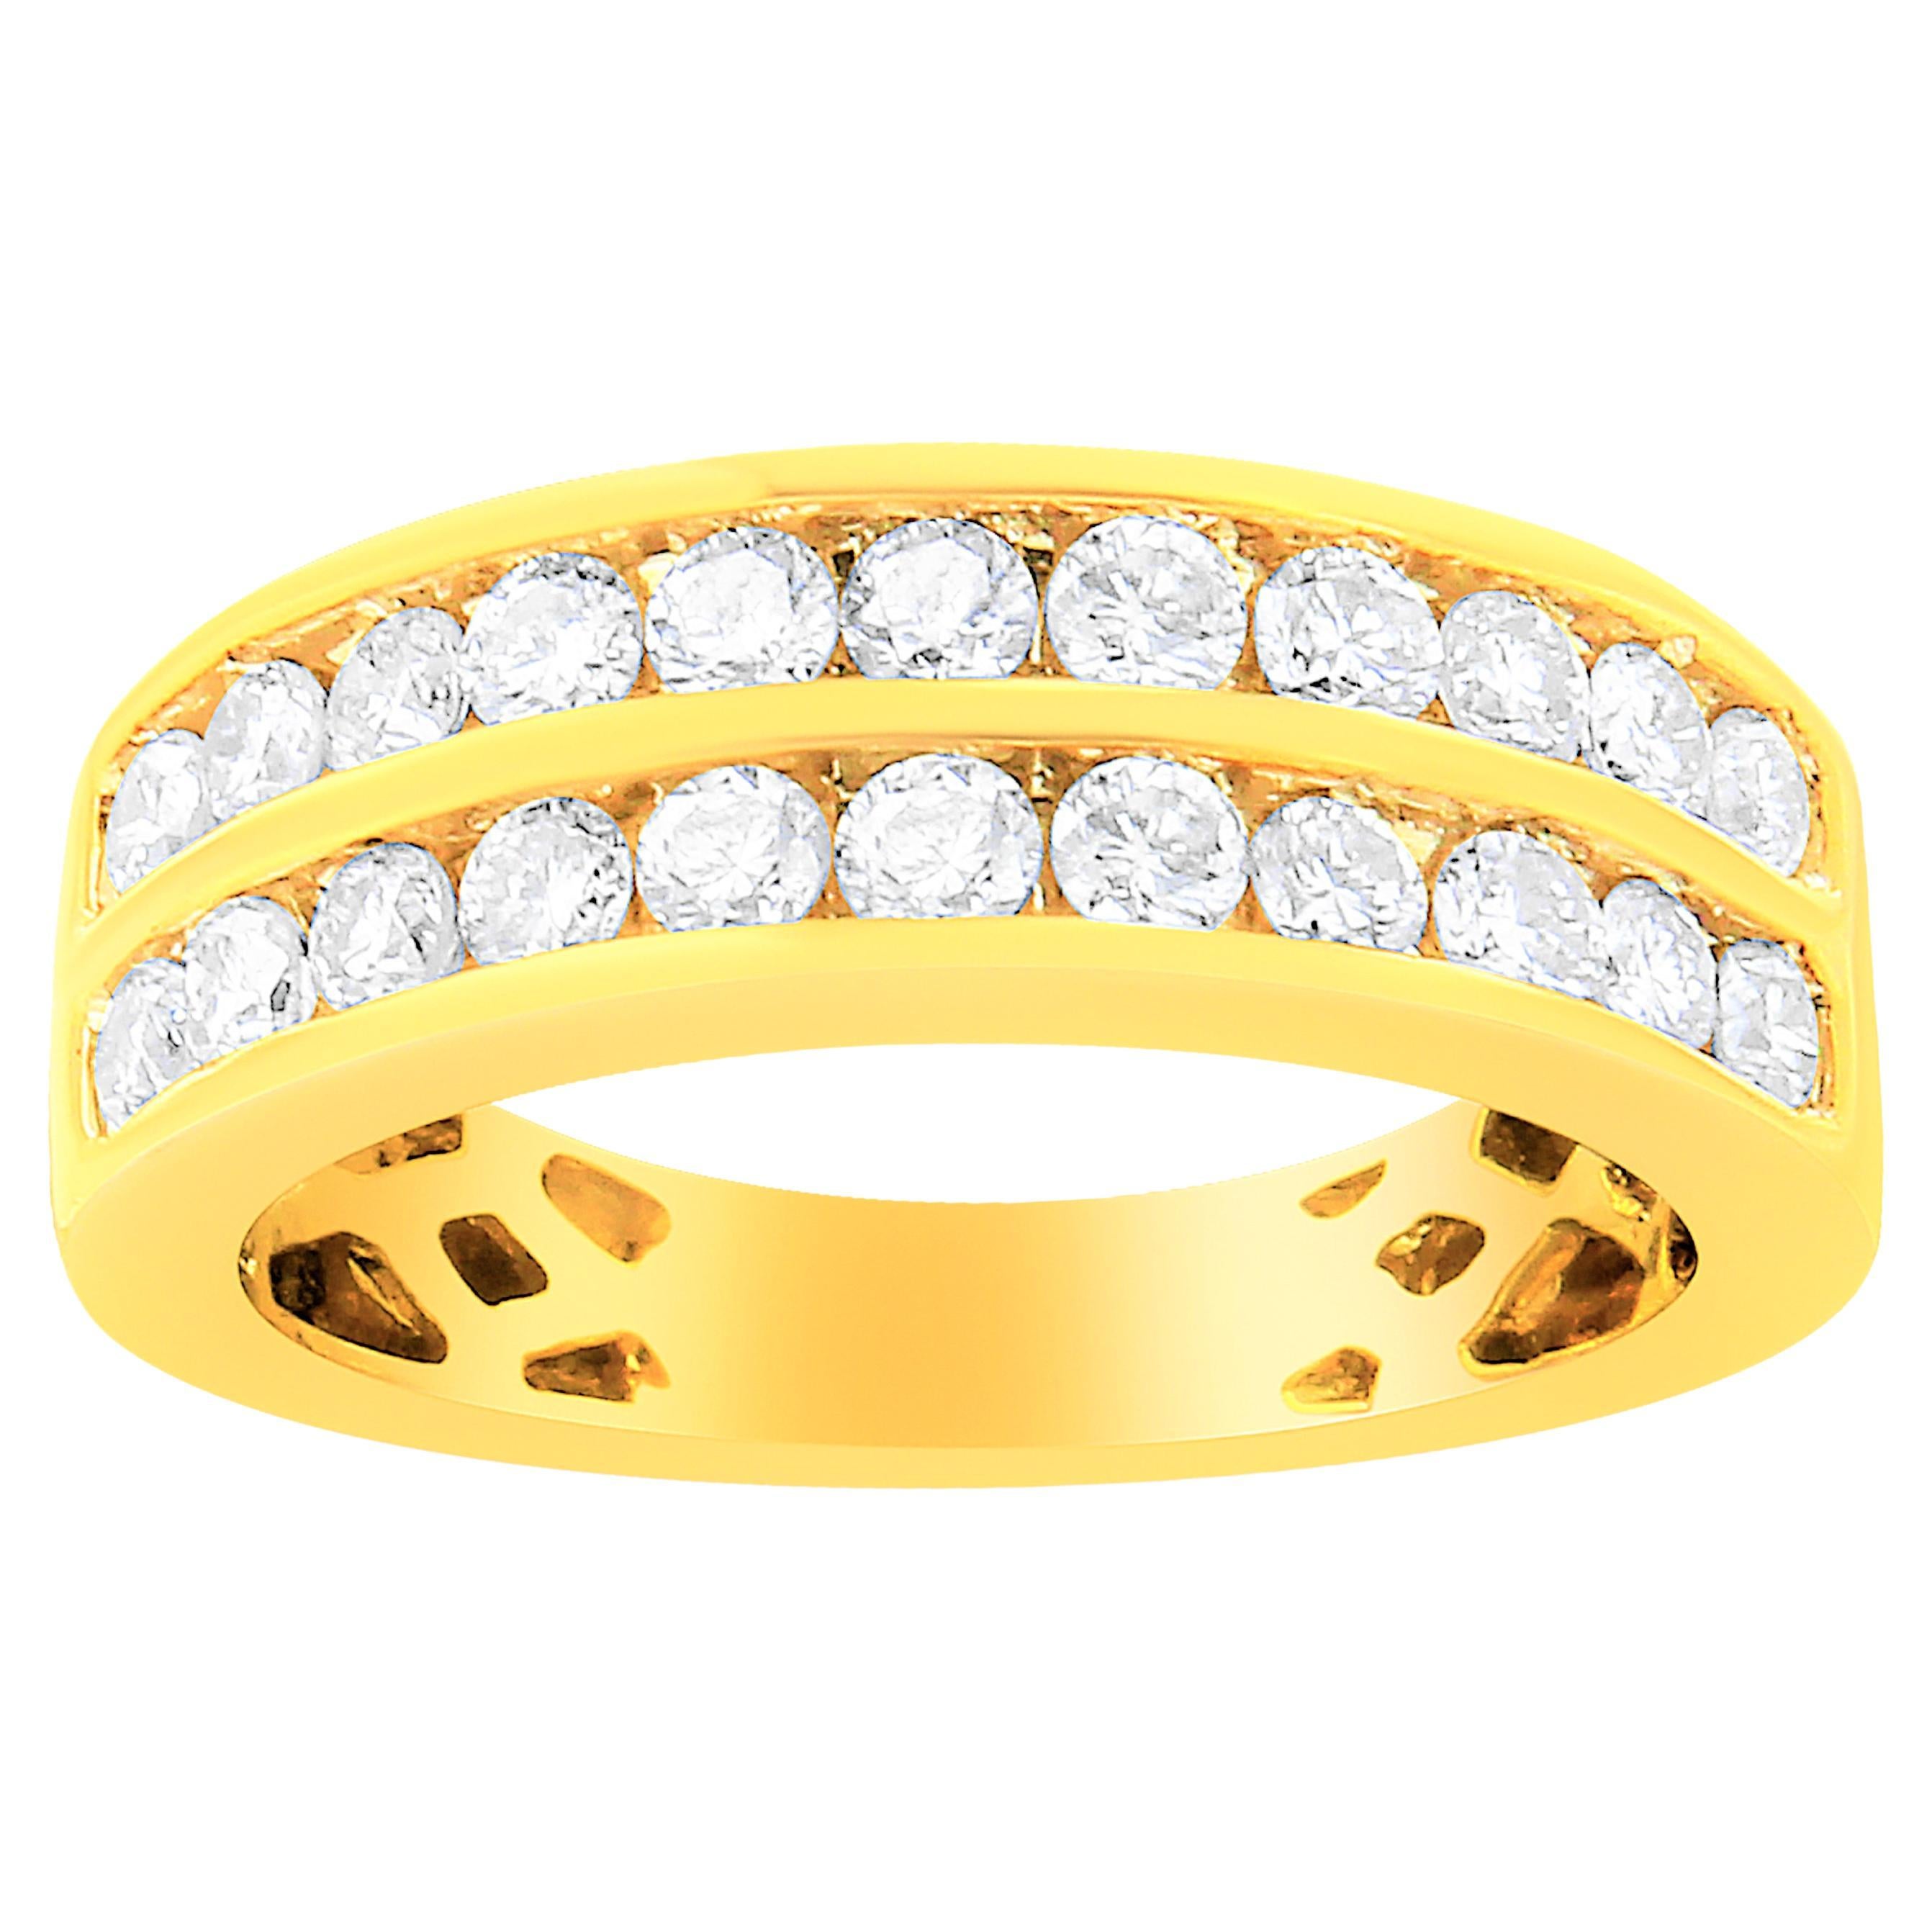 For Sale:  10K Yellow Gold 1.00 Carat Two-Row Diamond Band Ring